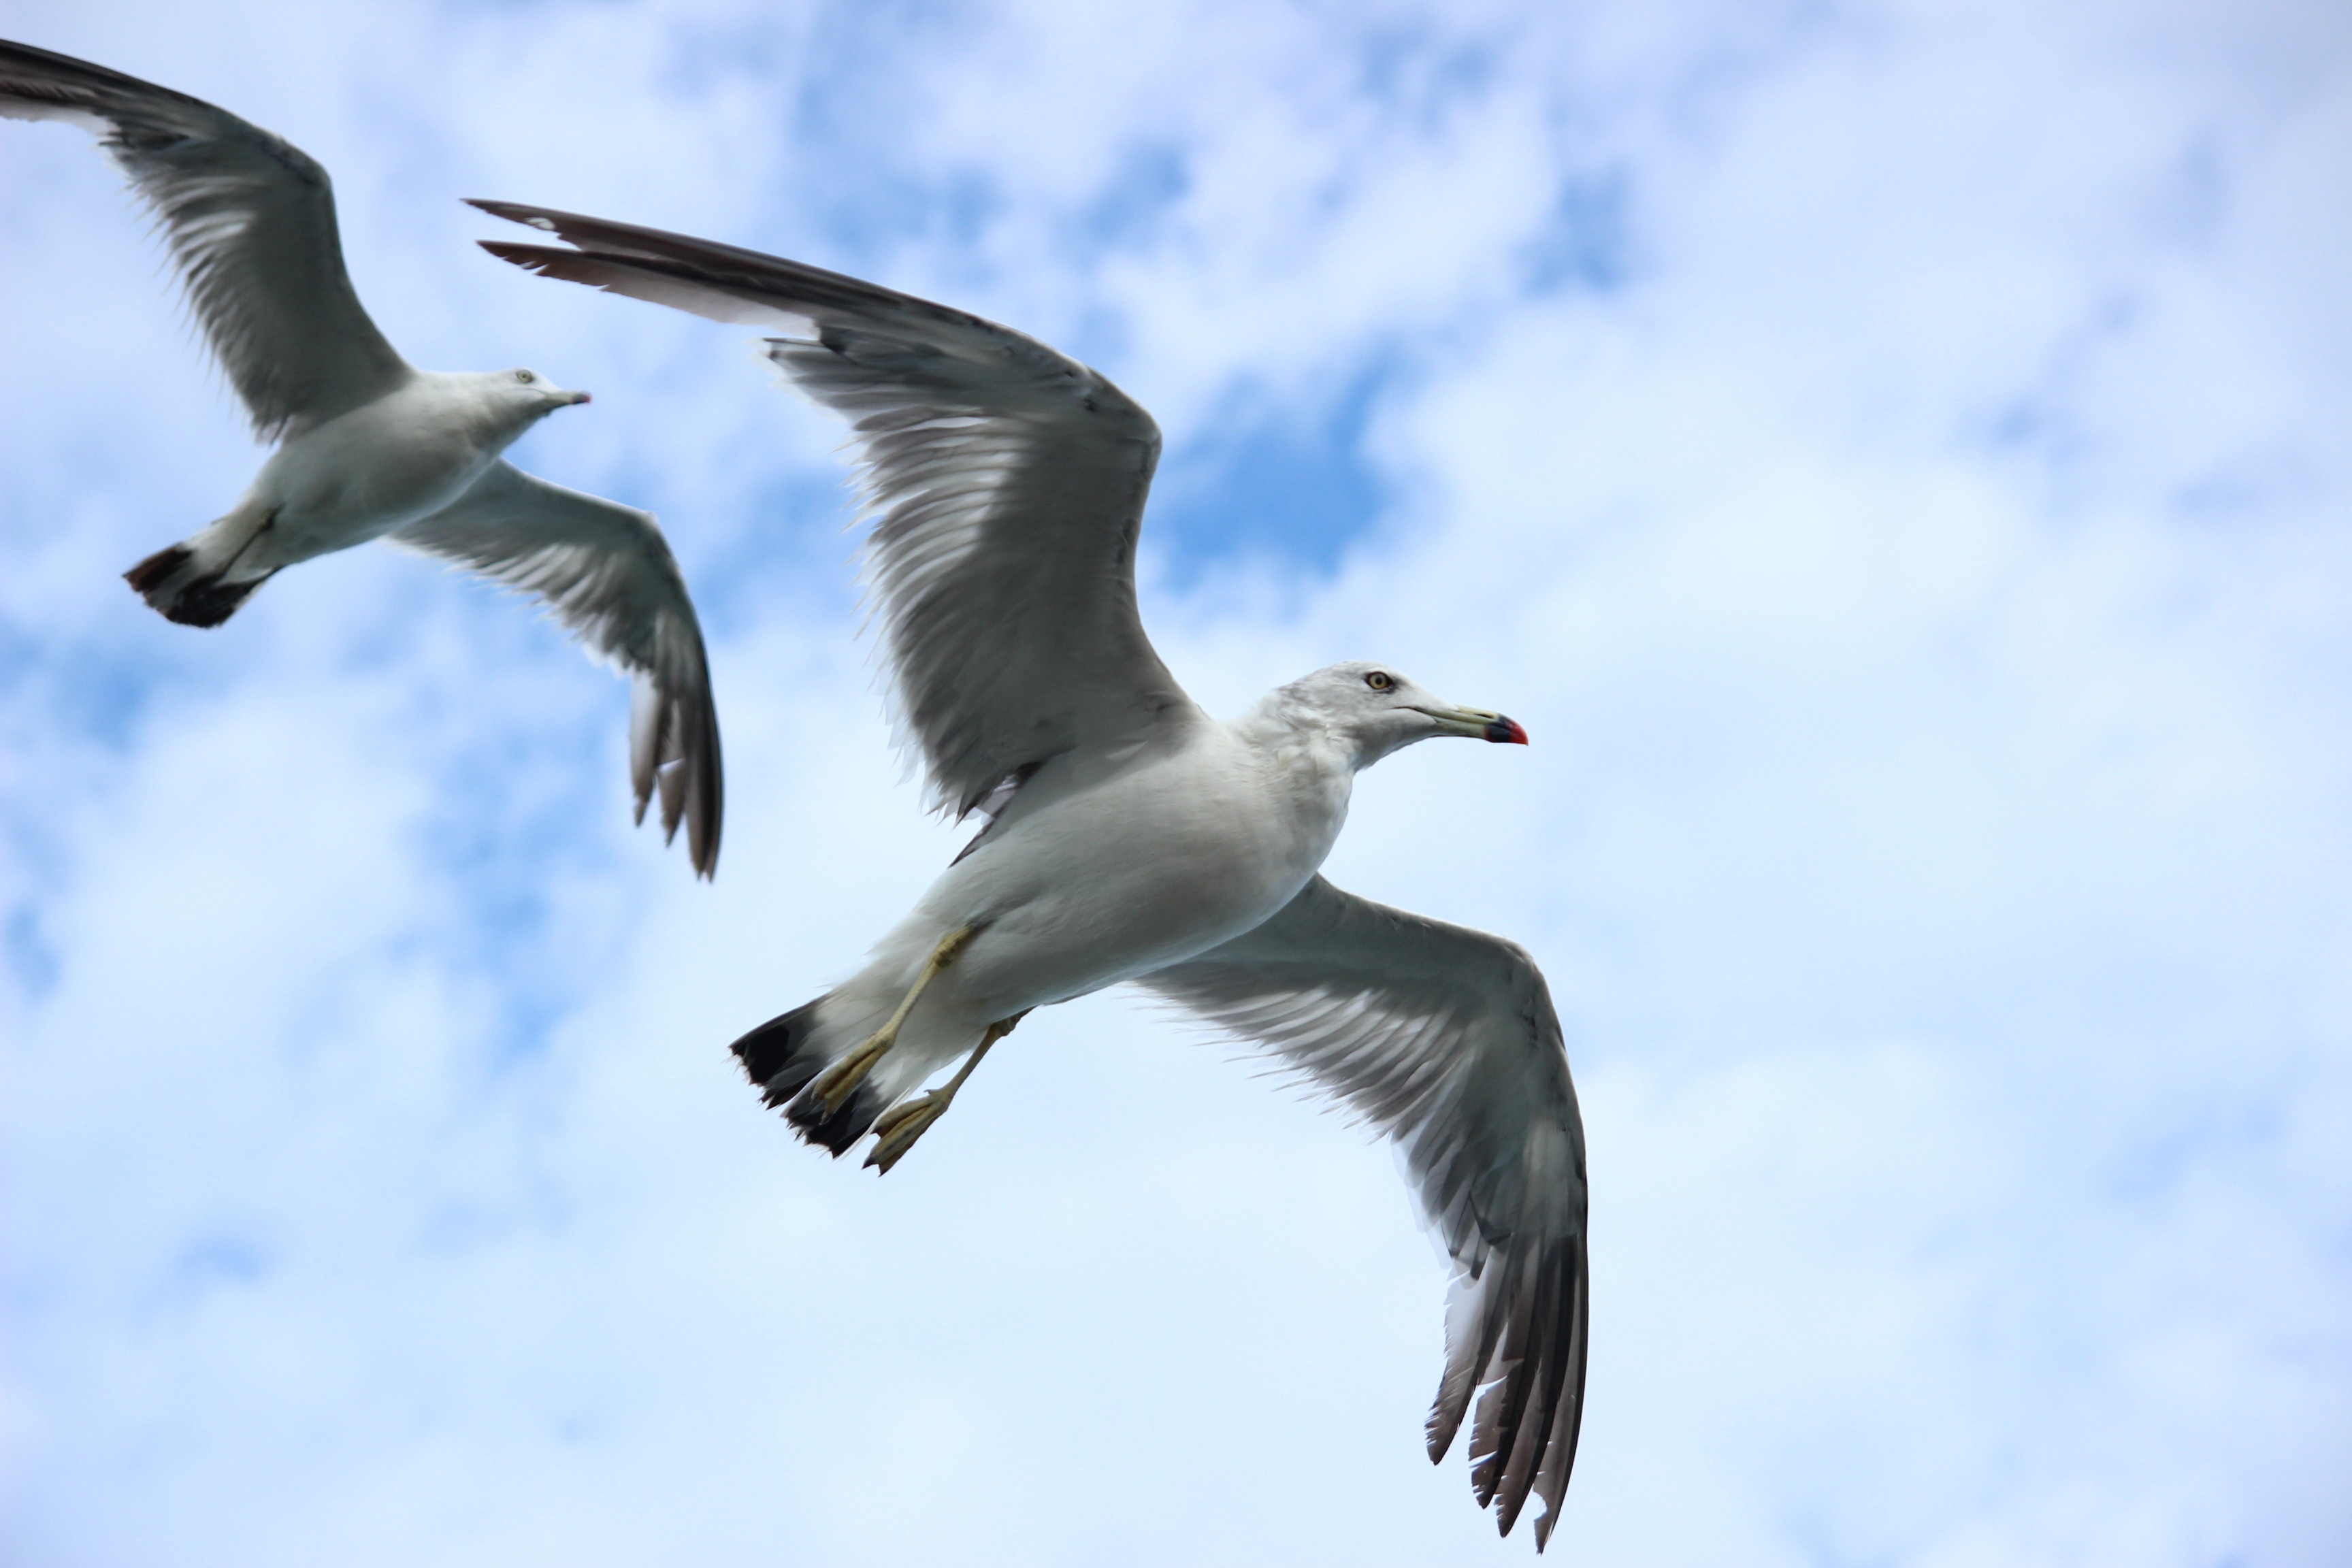 two seagulls during daytime